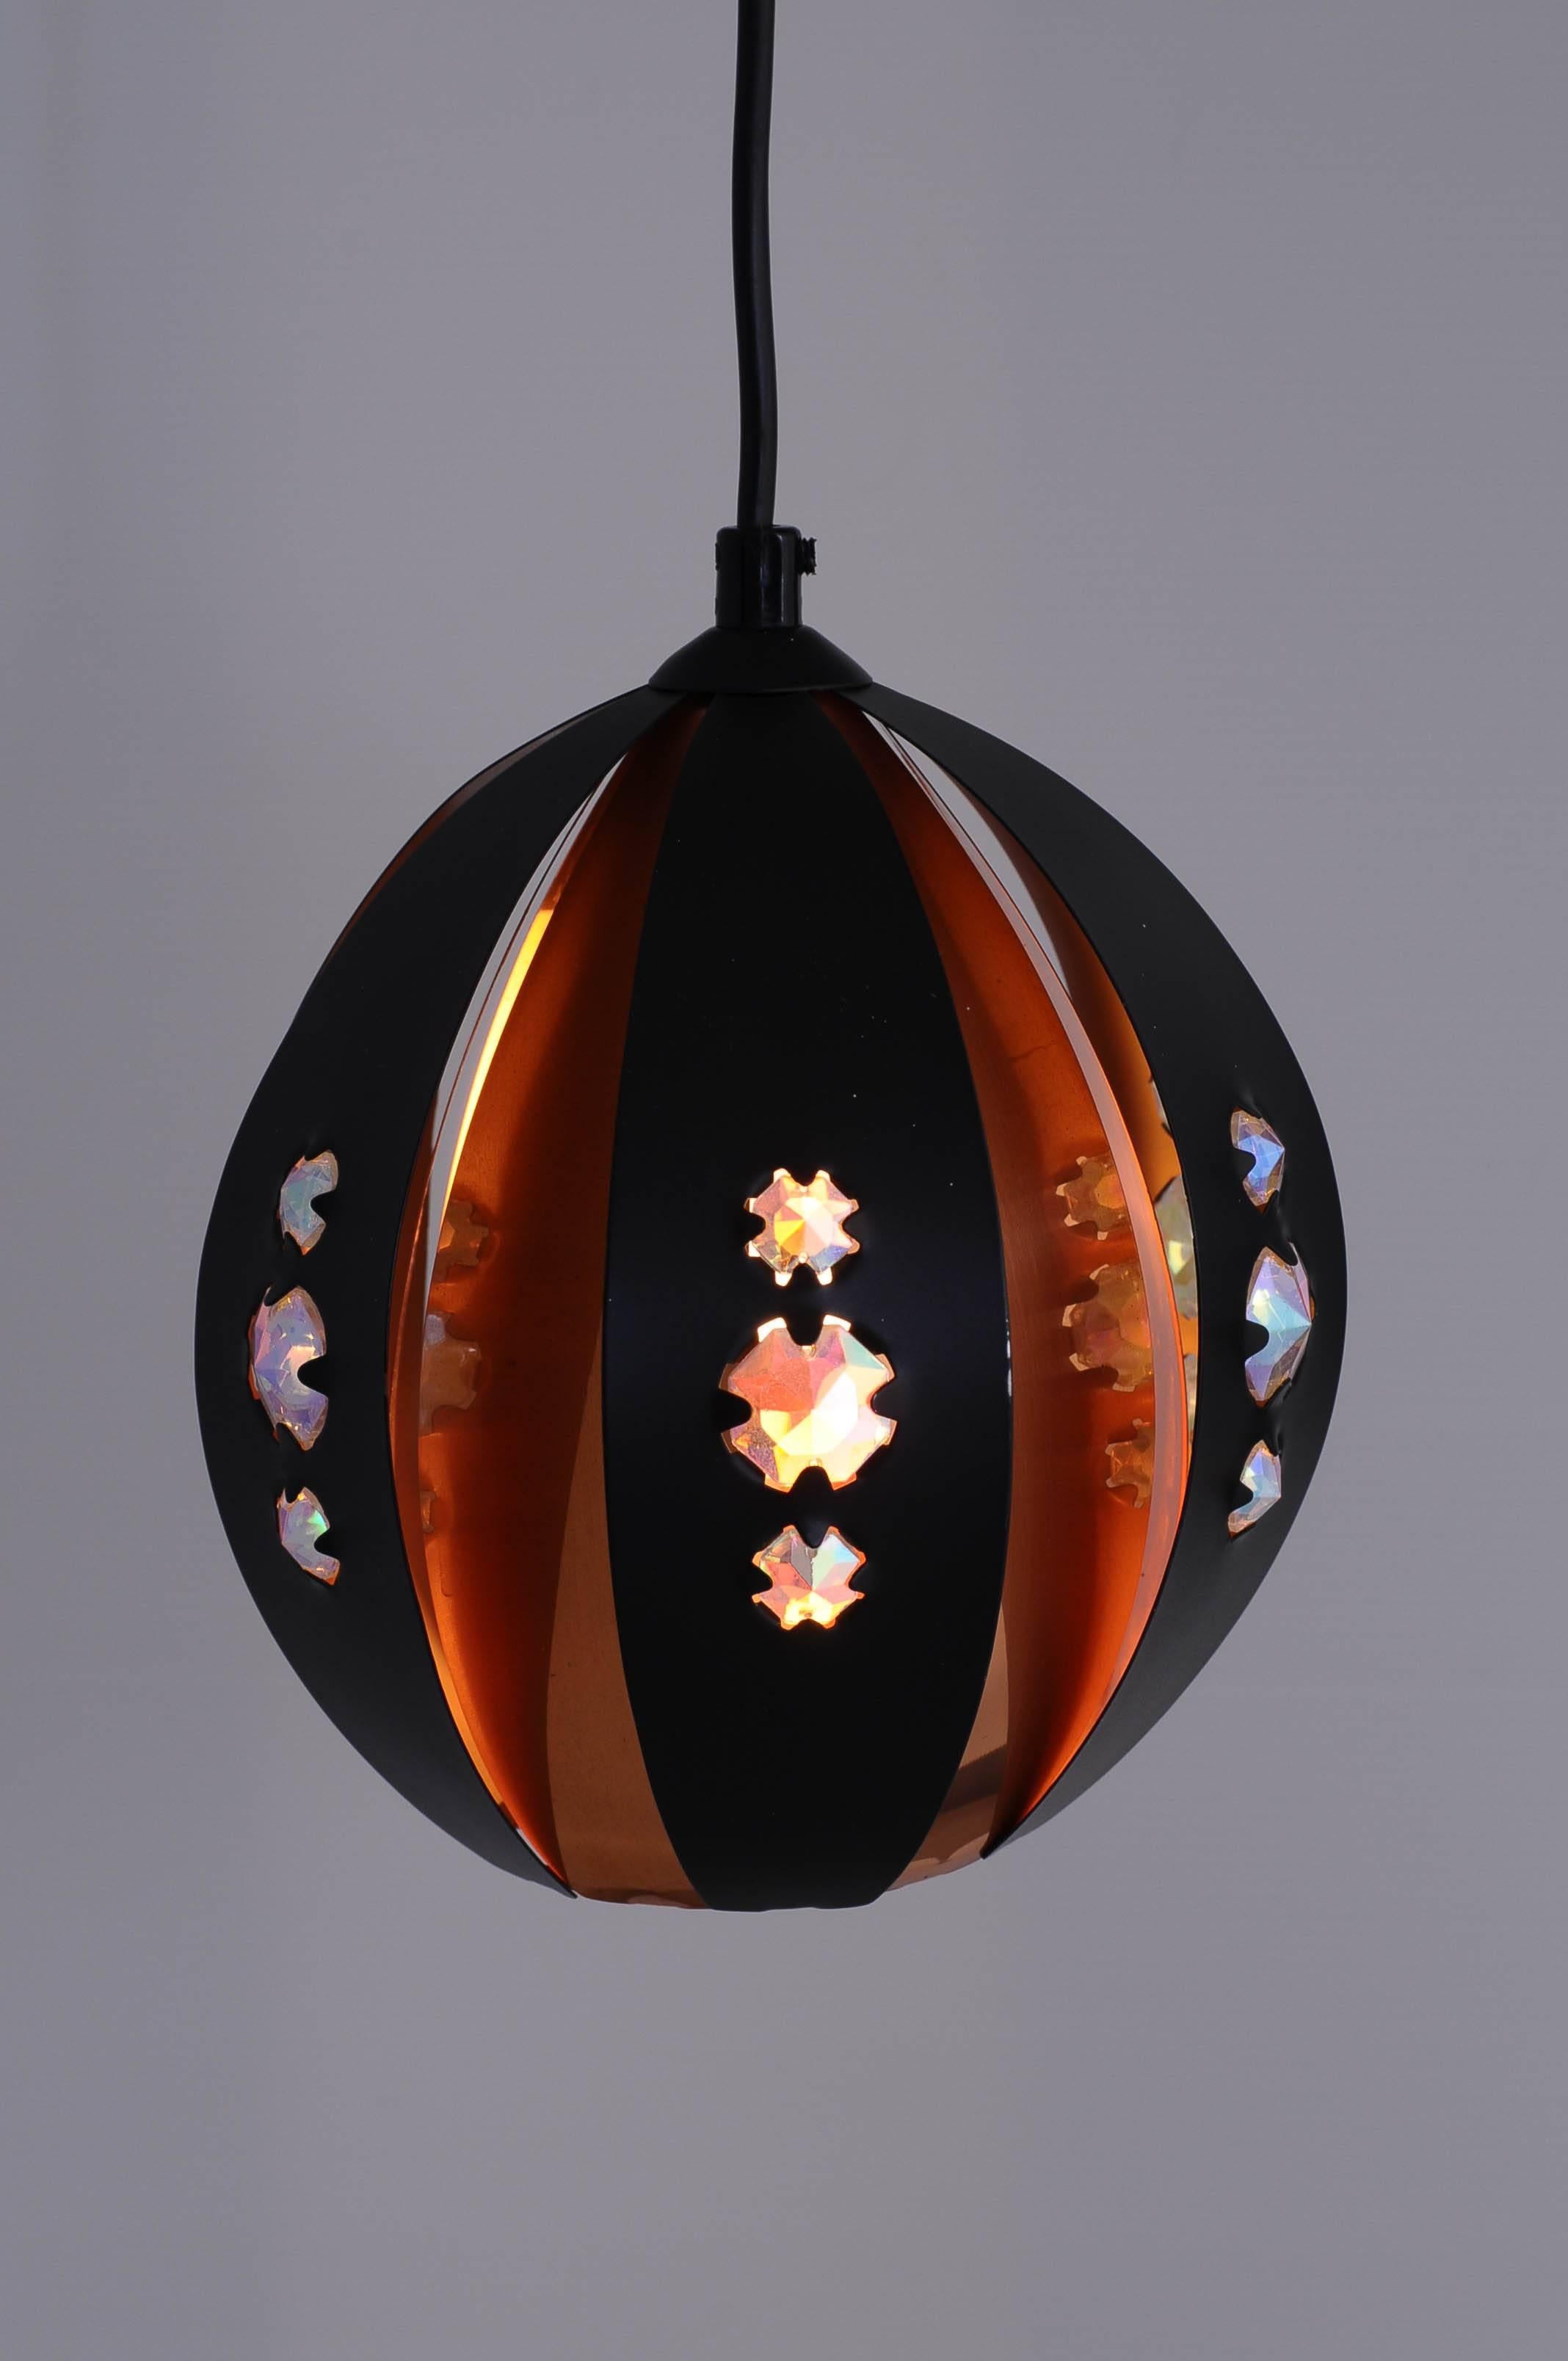 This is a small lamp designed and manufactured in Denmark in the 1970s for the Coronell Elektro.
Its shape is spherical.
It is made of metal. Copper and black color.
The designer is Werner Schou.
Lamp made of metal decorated with colored